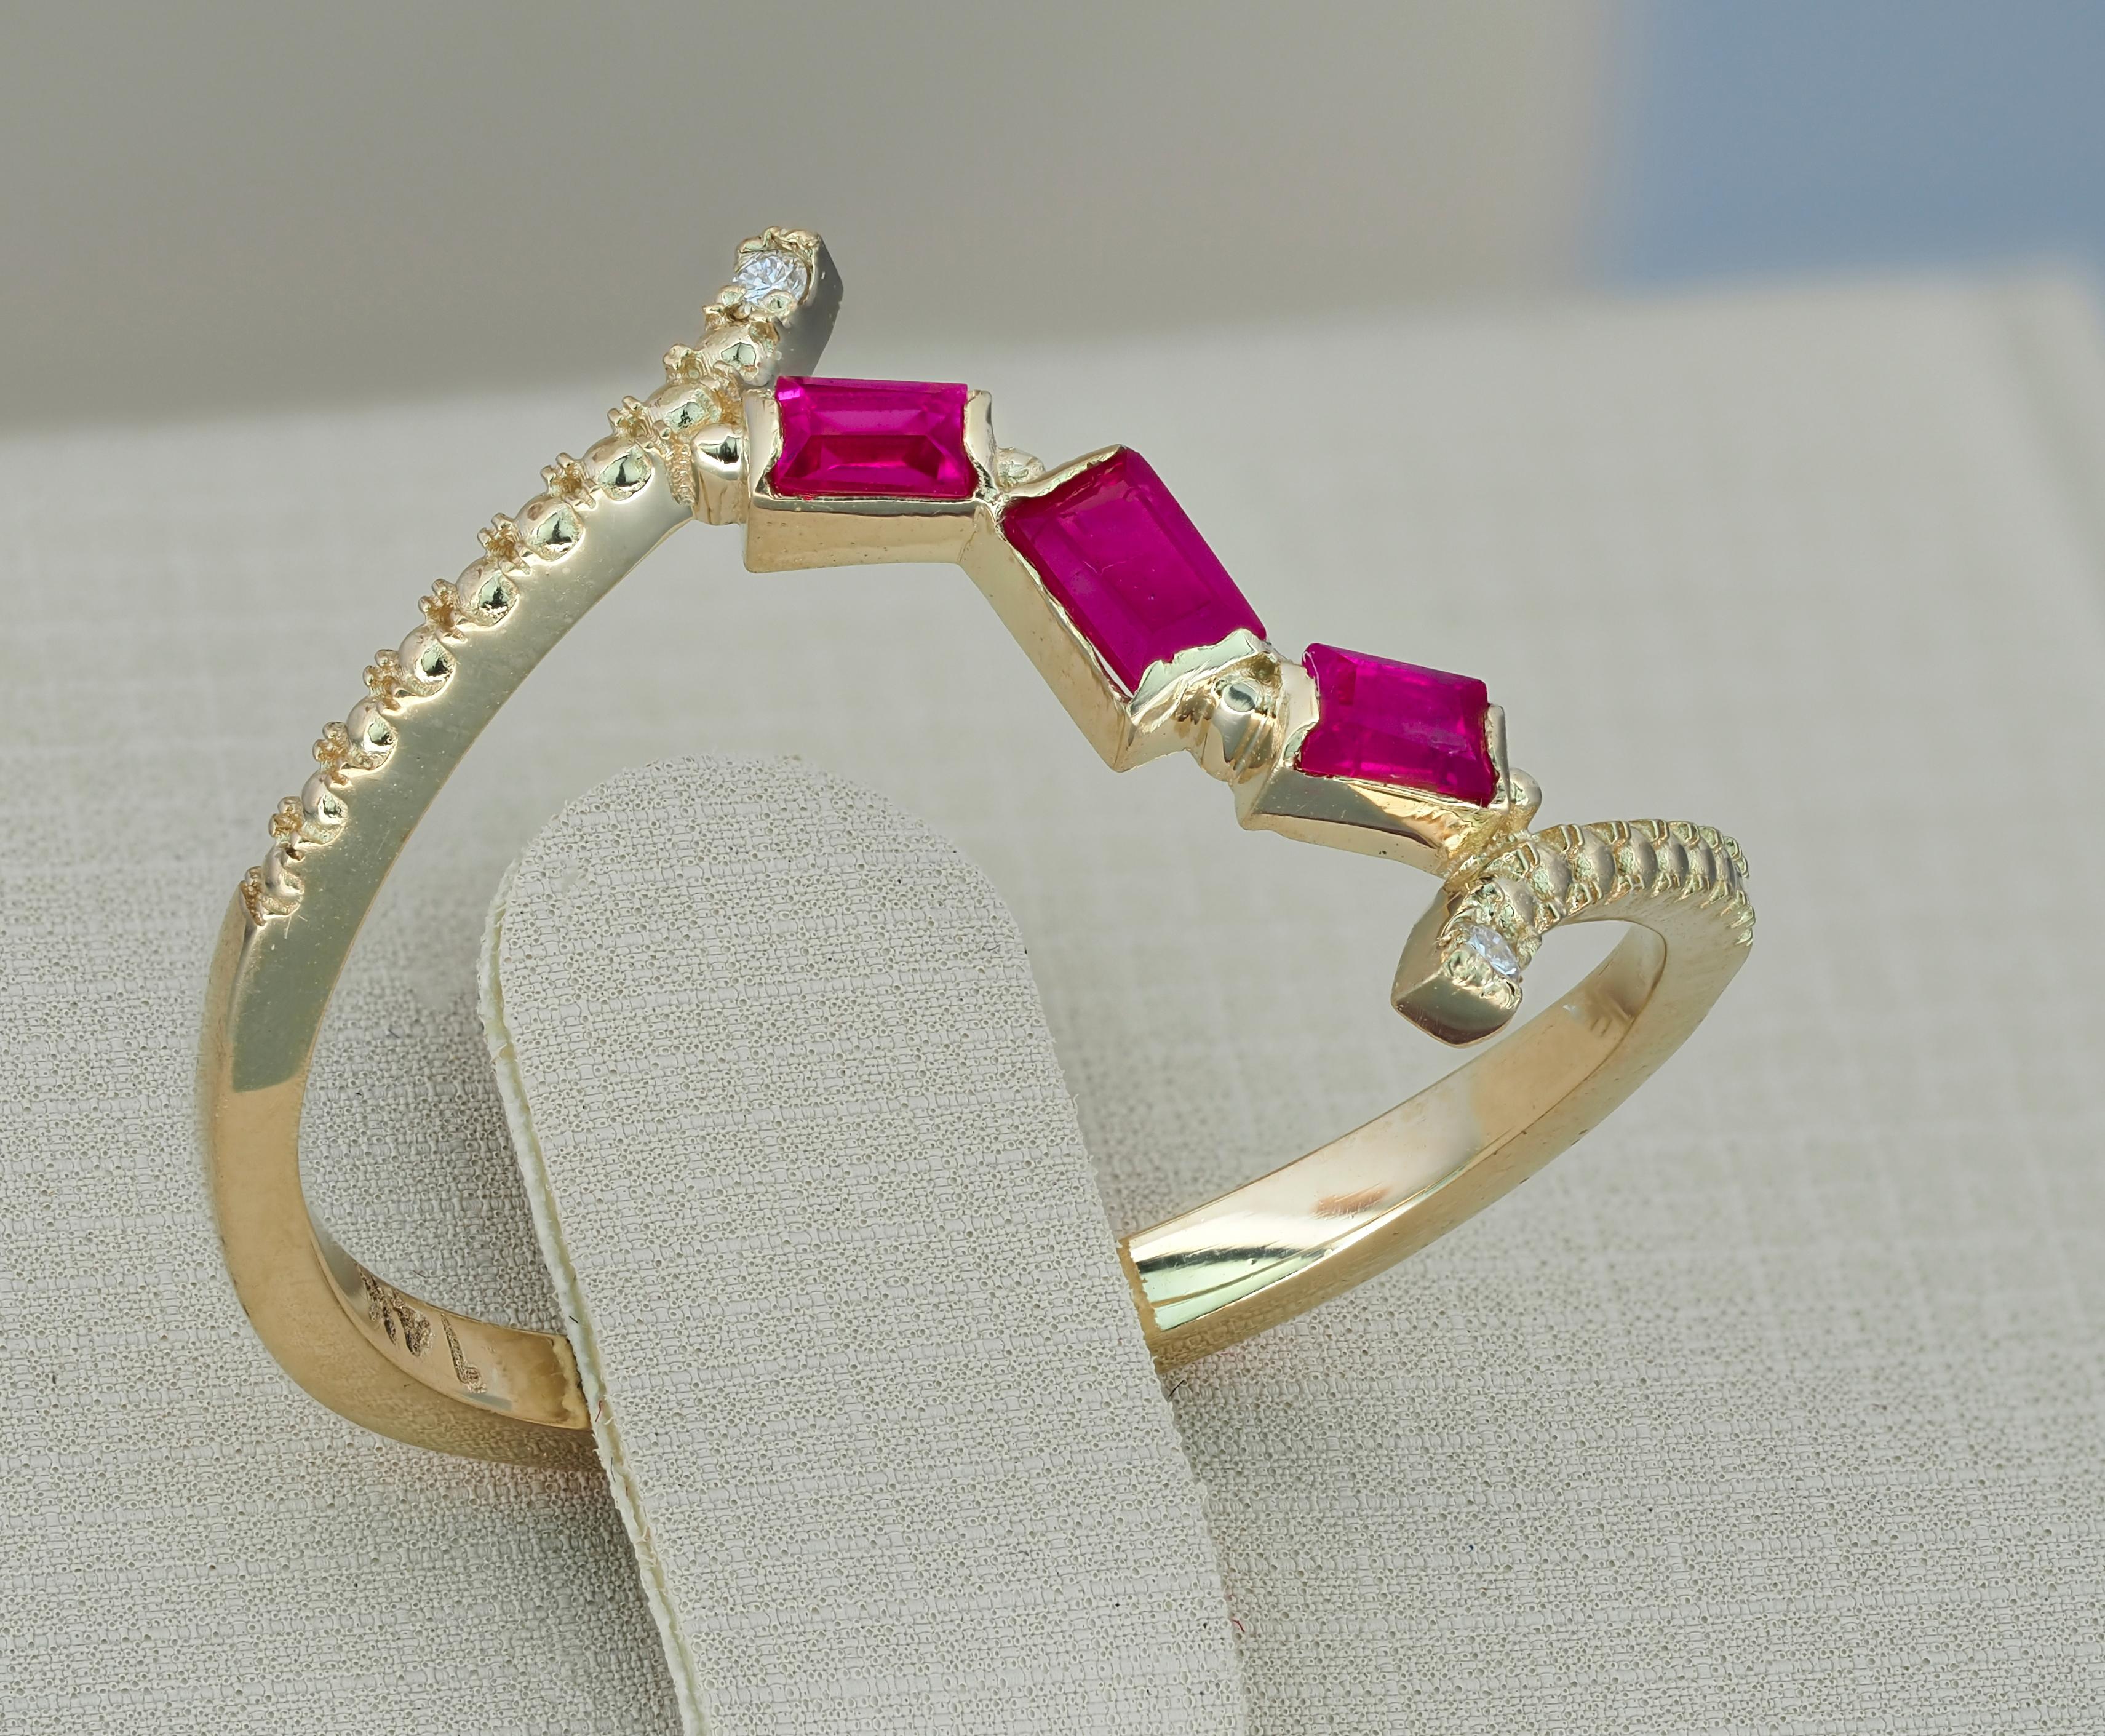 For Sale:  14k Gold Ring with Rubies and Diamonds. Baguette ruby ring. 4